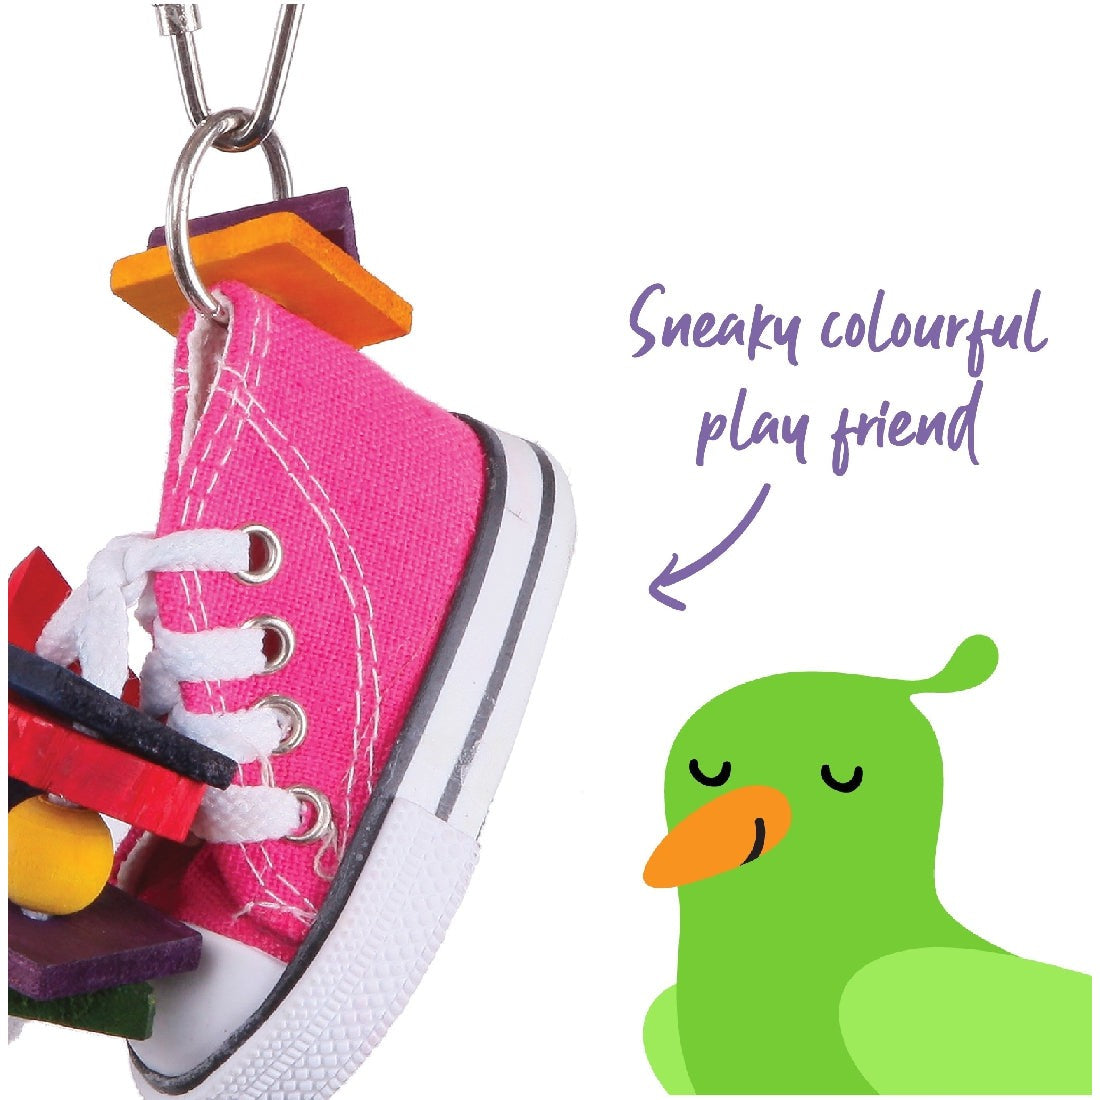 A pink sneaker keychain with a green cartoon bird toy.